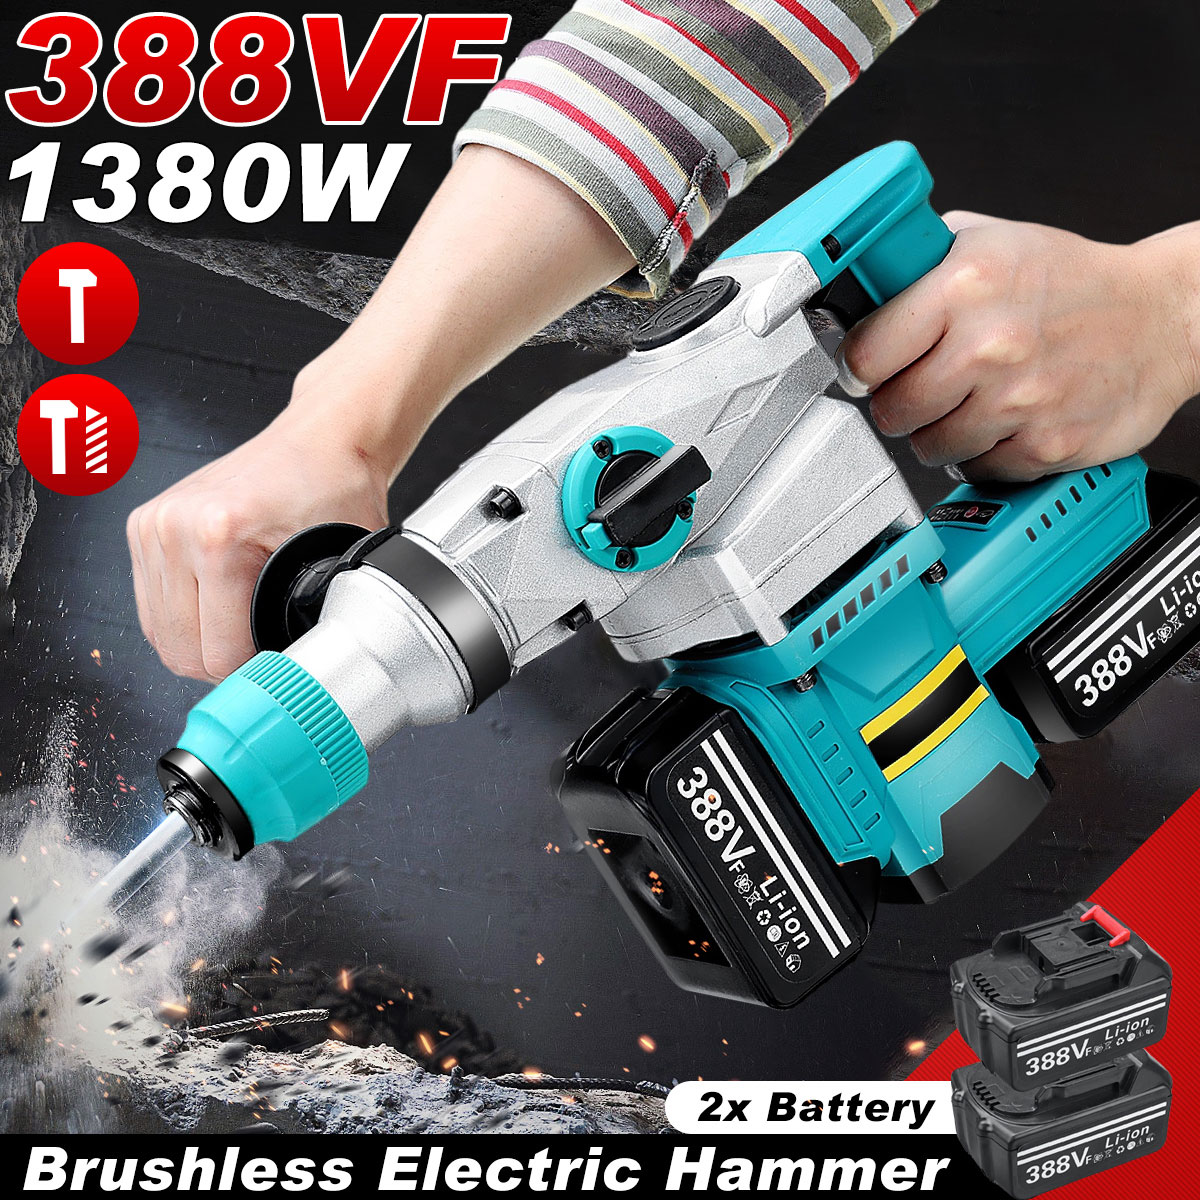 2000W-Brushless-Electric-Hammer-Heavy-Duty-Rechargeable-Impact-Drill-Multifunction-Hammer-W-2pcs-Bat-1879569-2